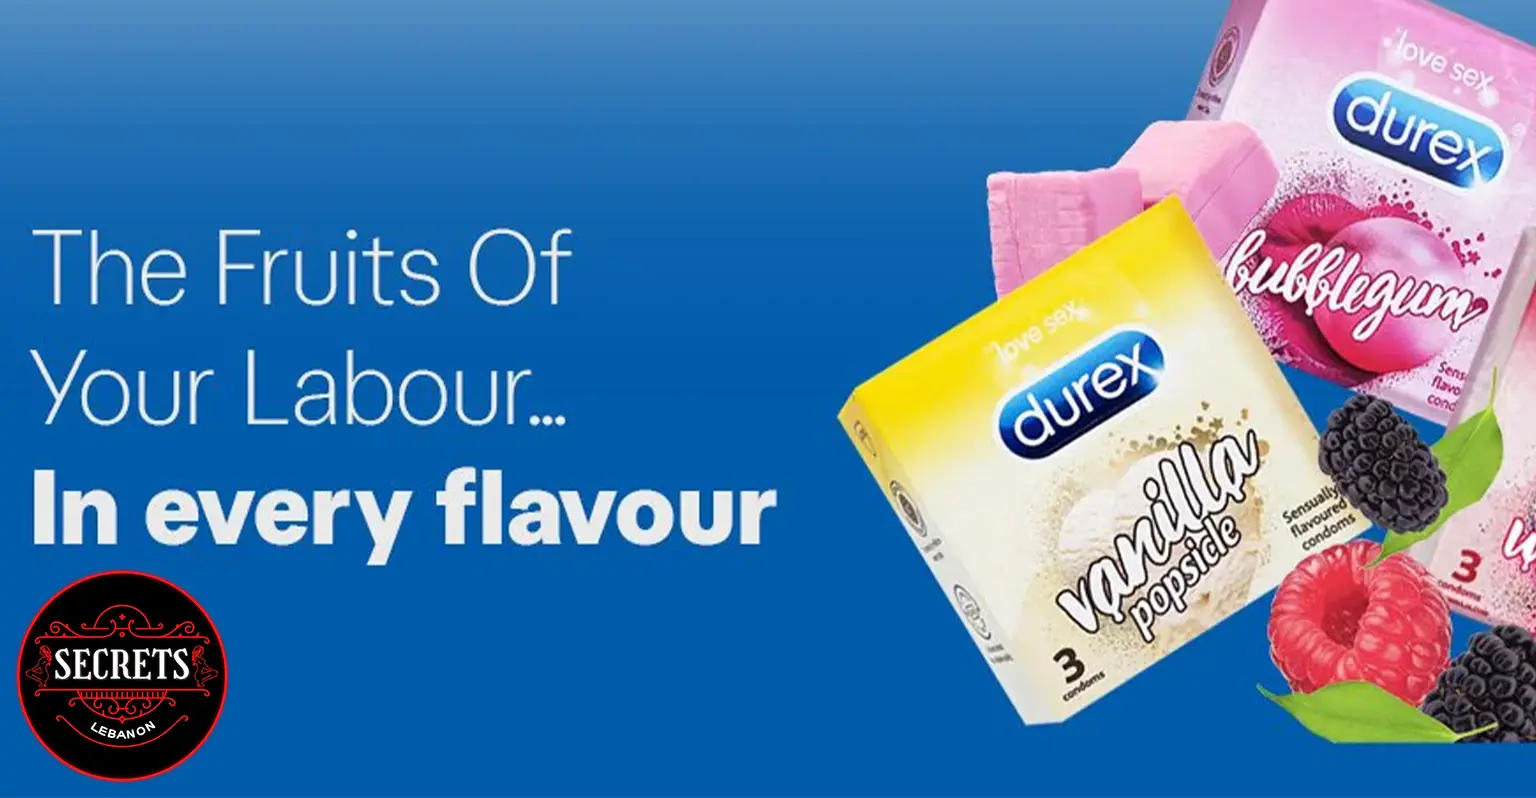 Banner for the article, showing Durex condoms.